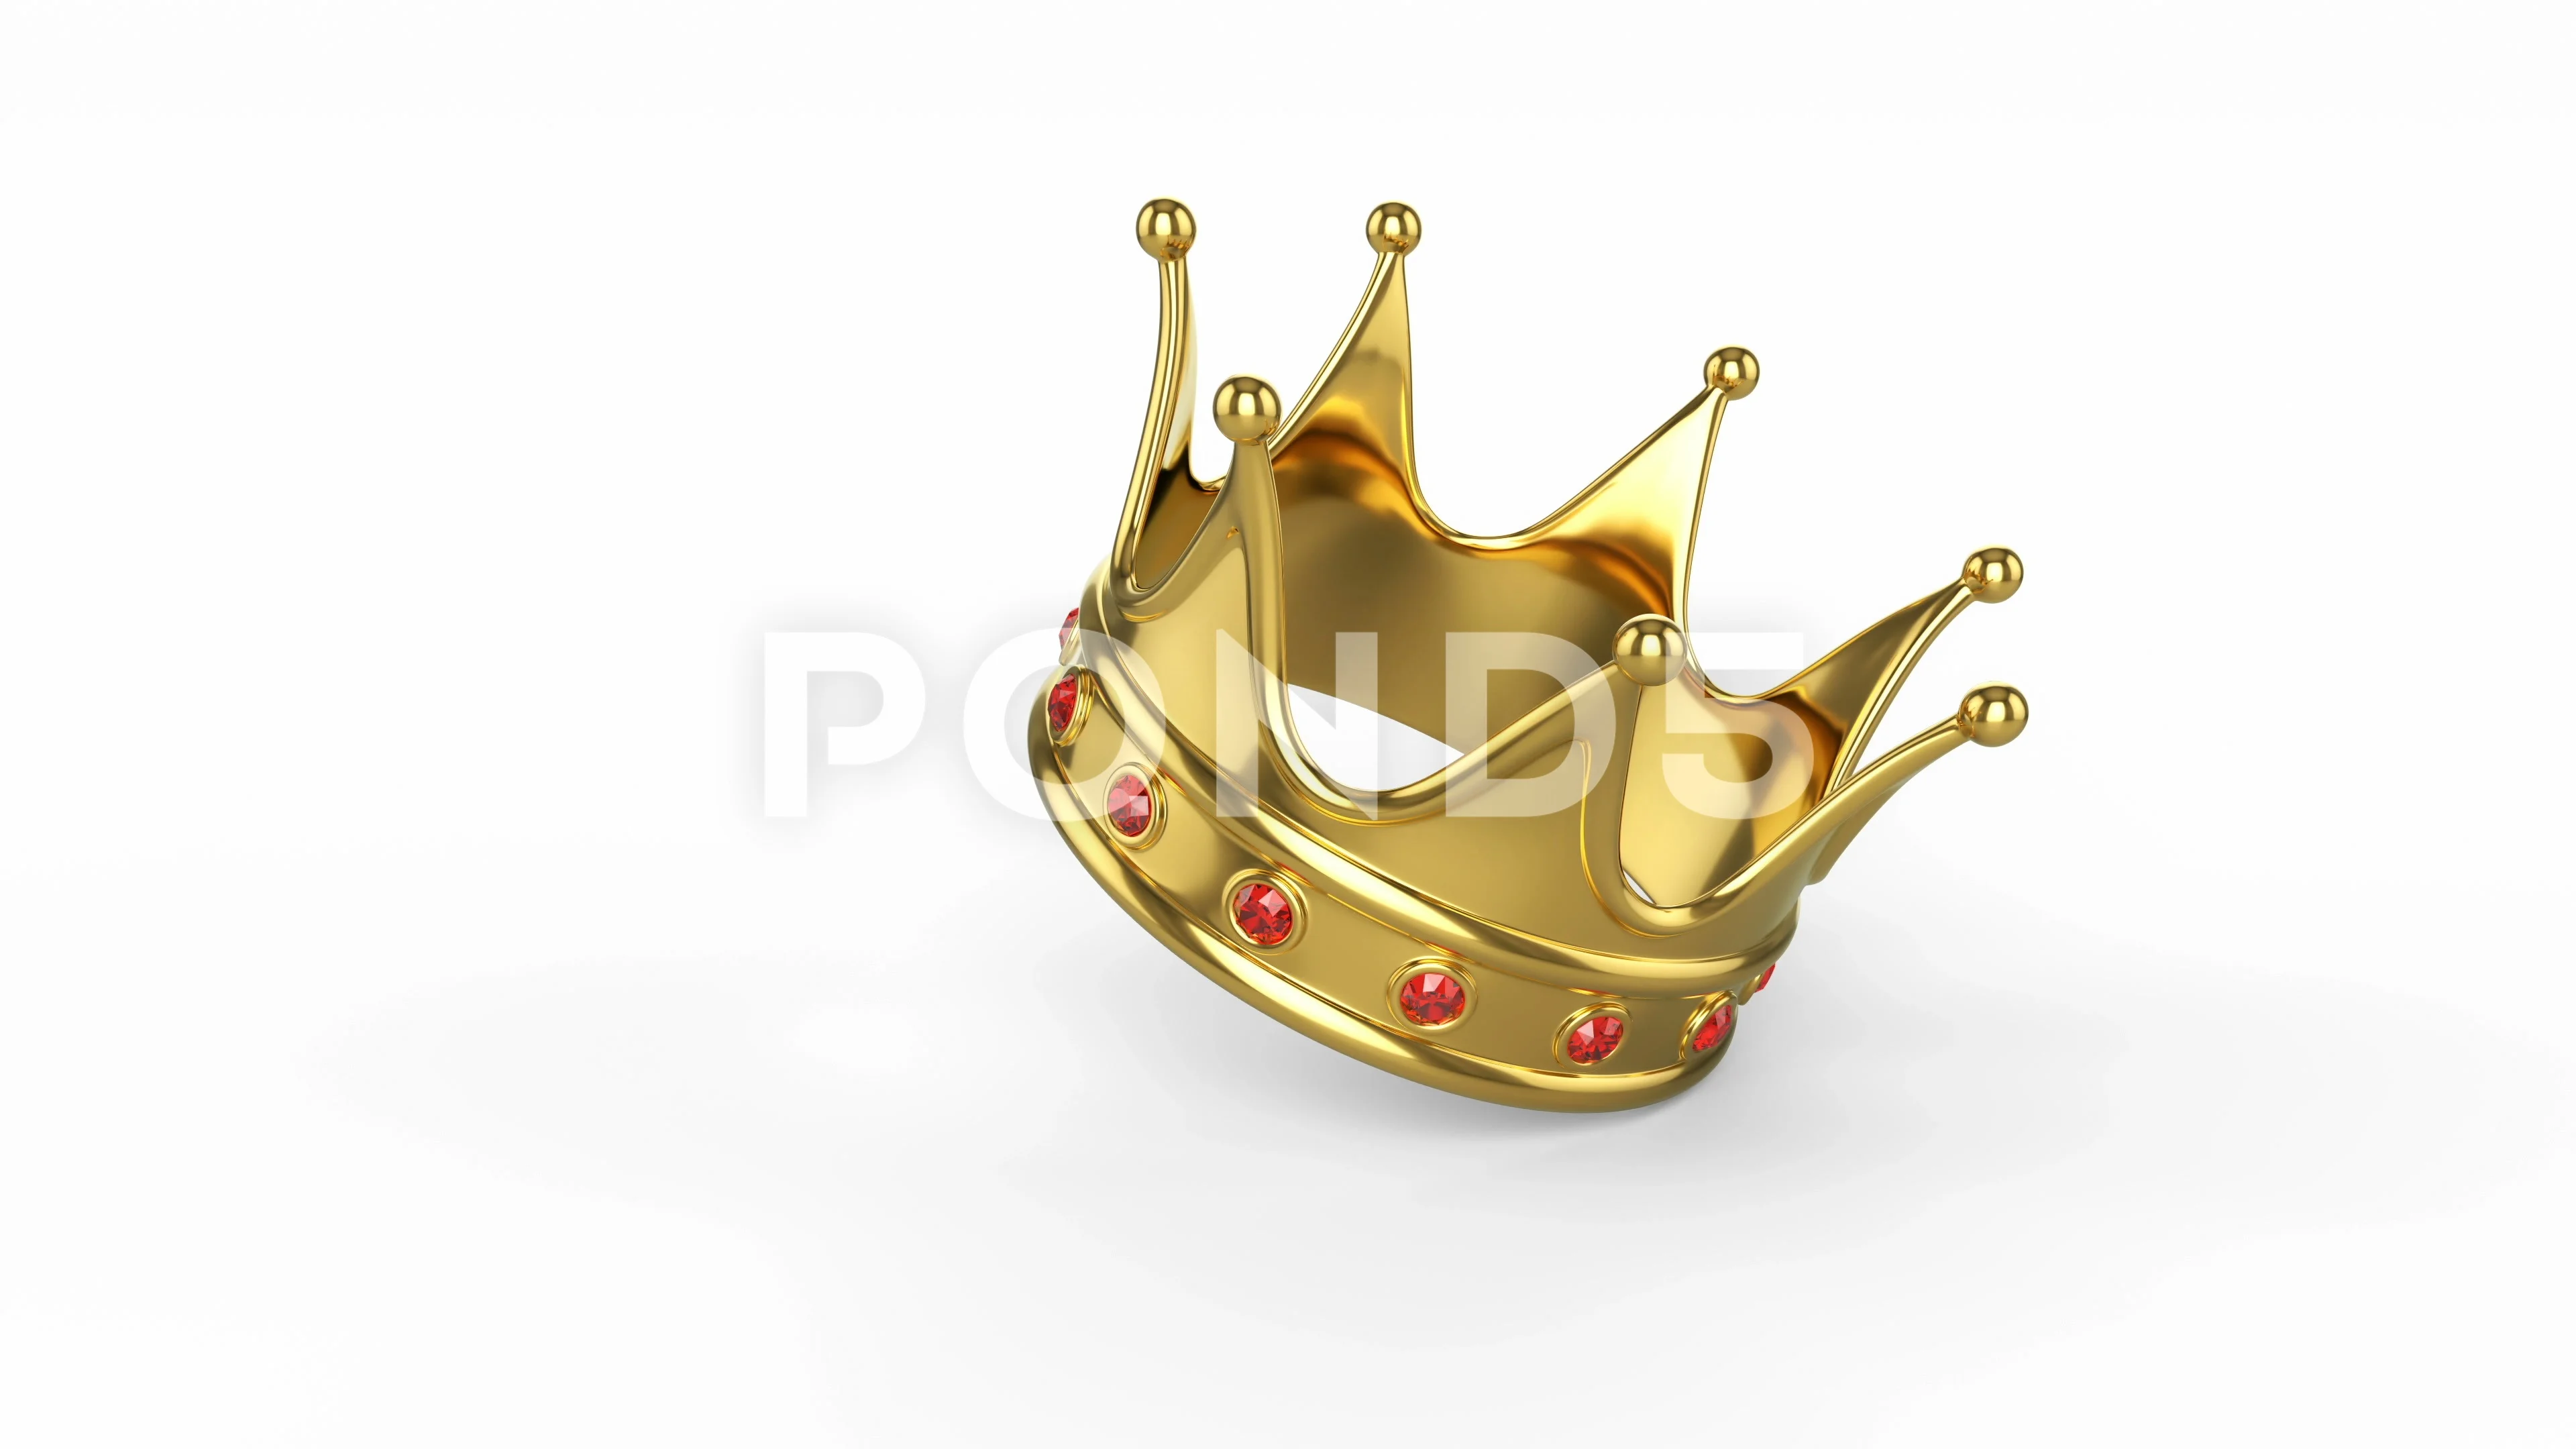 royal crown backgrounds